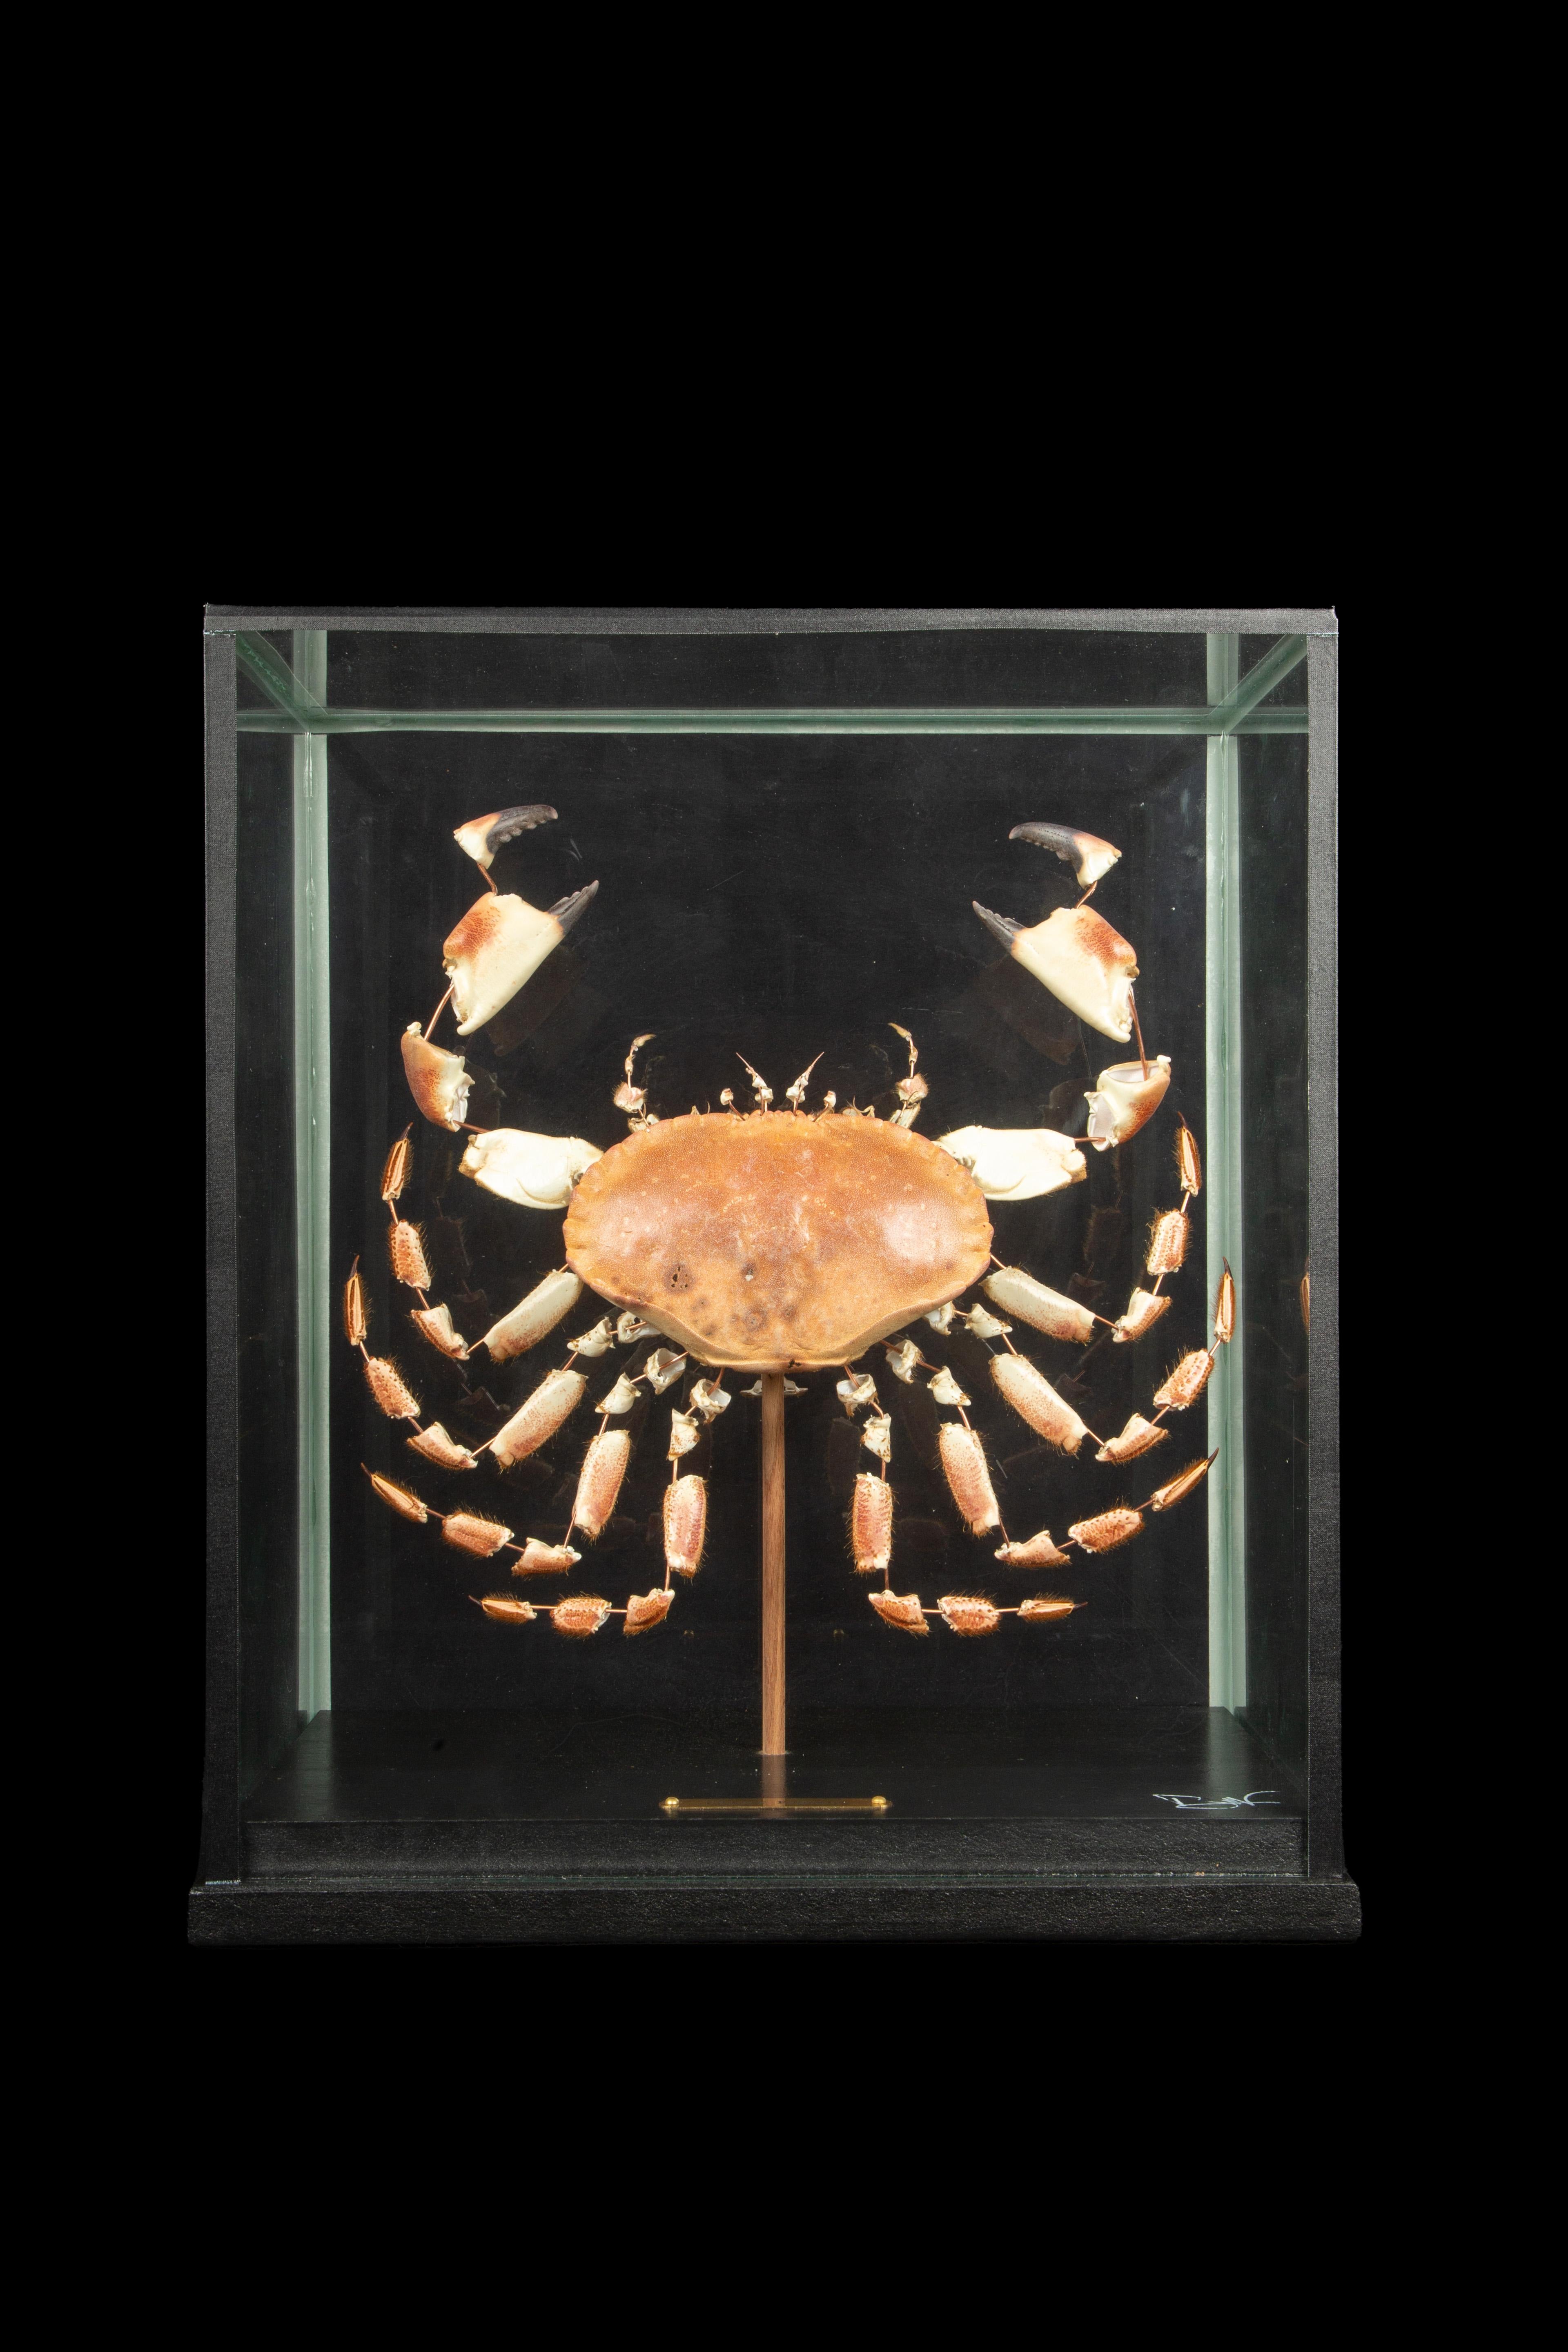 Large Deconstructed Brown Crab (Cancer Pagurus) Under a Custom Glass Case.

Cancer pagurus, also referred to as the brown crab or edible crab, is a crab species discovered in the North Sea, North Atlantic Ocean, and potentially the Mediterranean